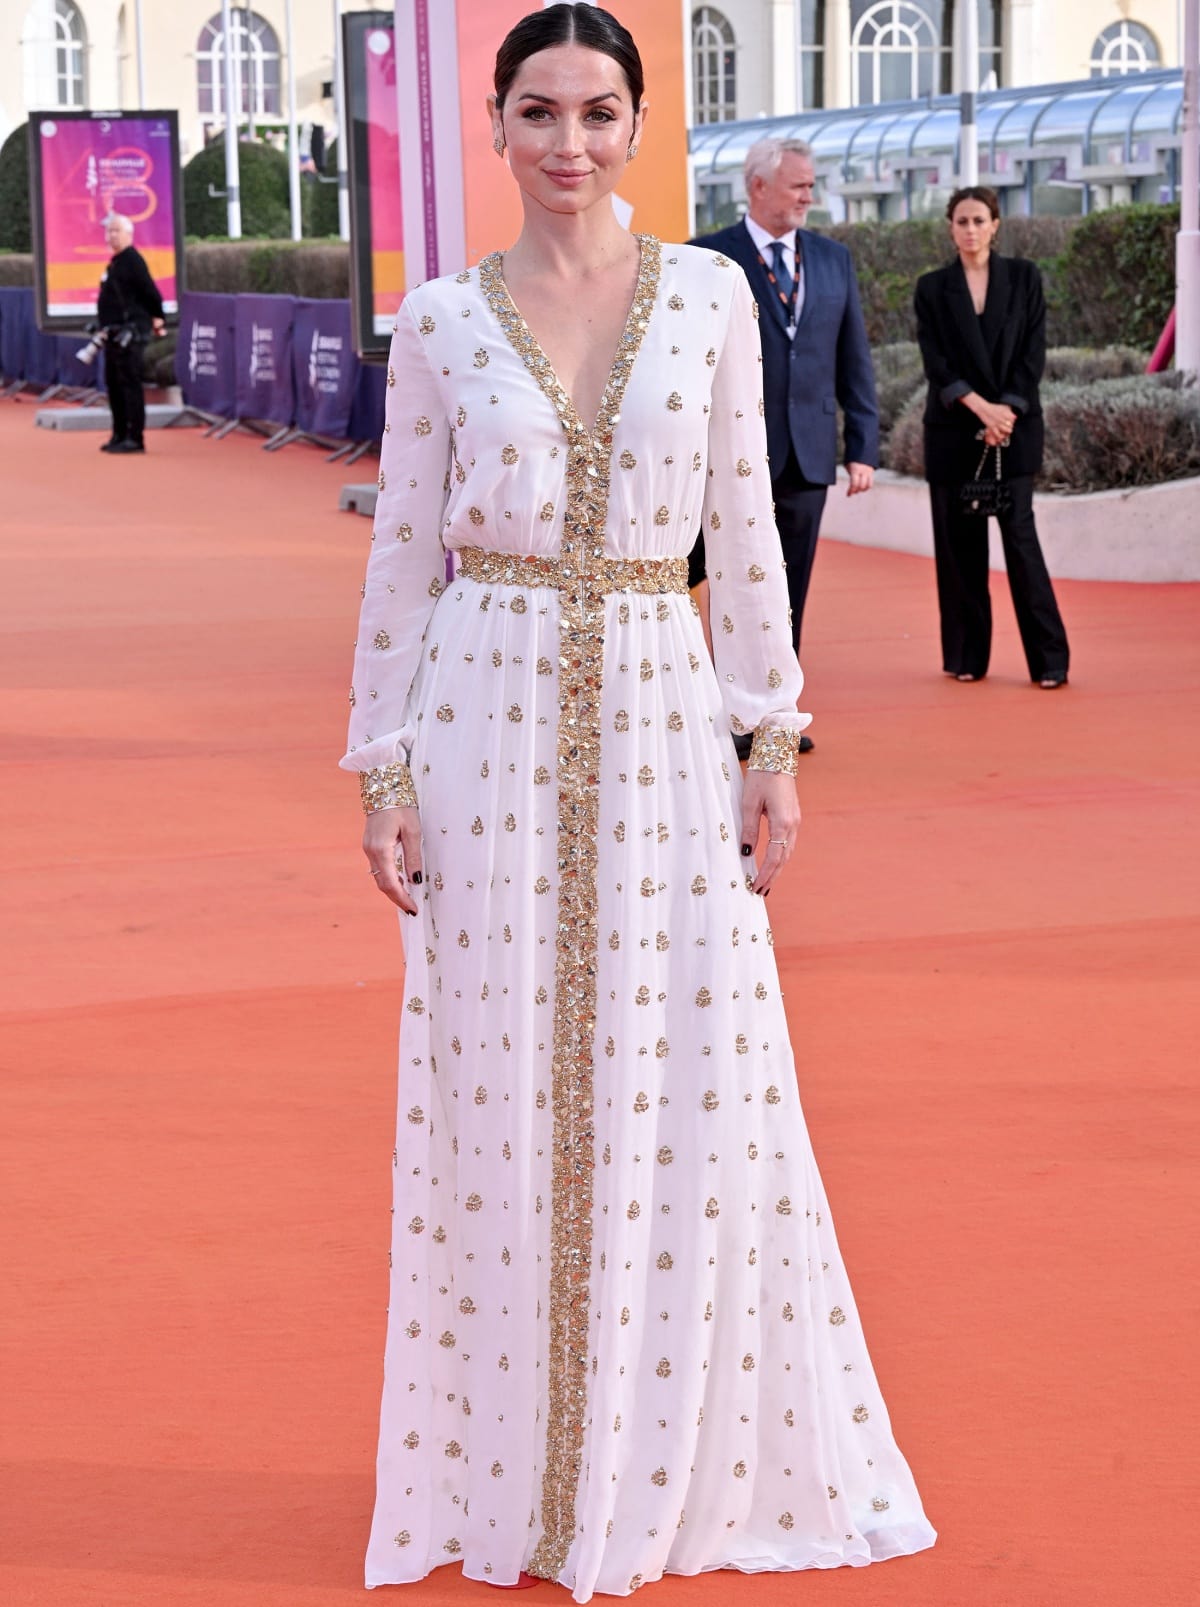 Ana de Armas wearing a custom Louis Vuitton gown at the Blonde premiere during the 48th Deauville American Film Festival